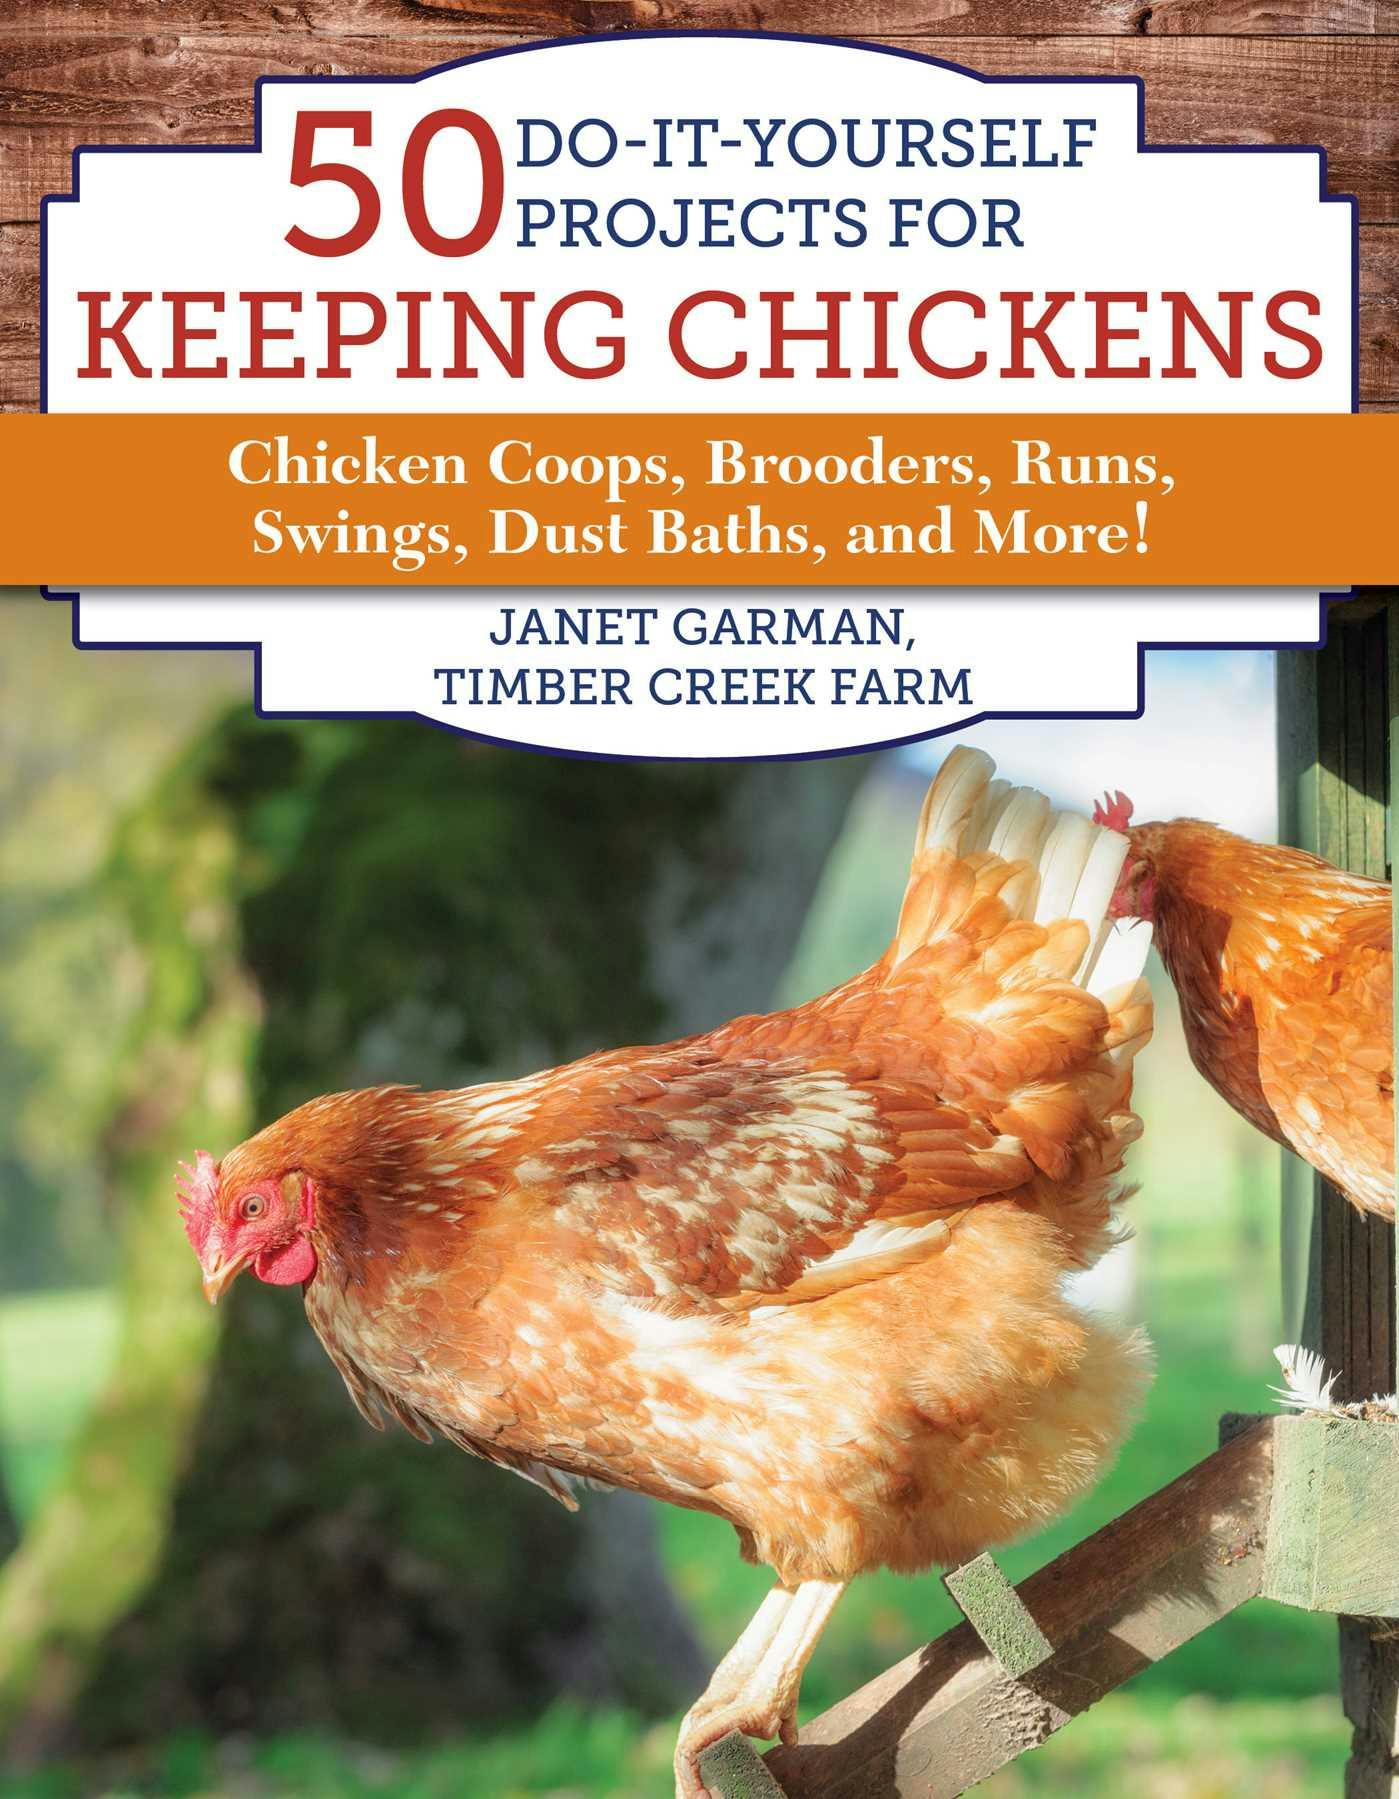 50 Do-It-Yourself Projects for Keeping Chickens: Chicken Coops, Brooders, Runs, Swings, Dust Baths, and More! - Janet Garman